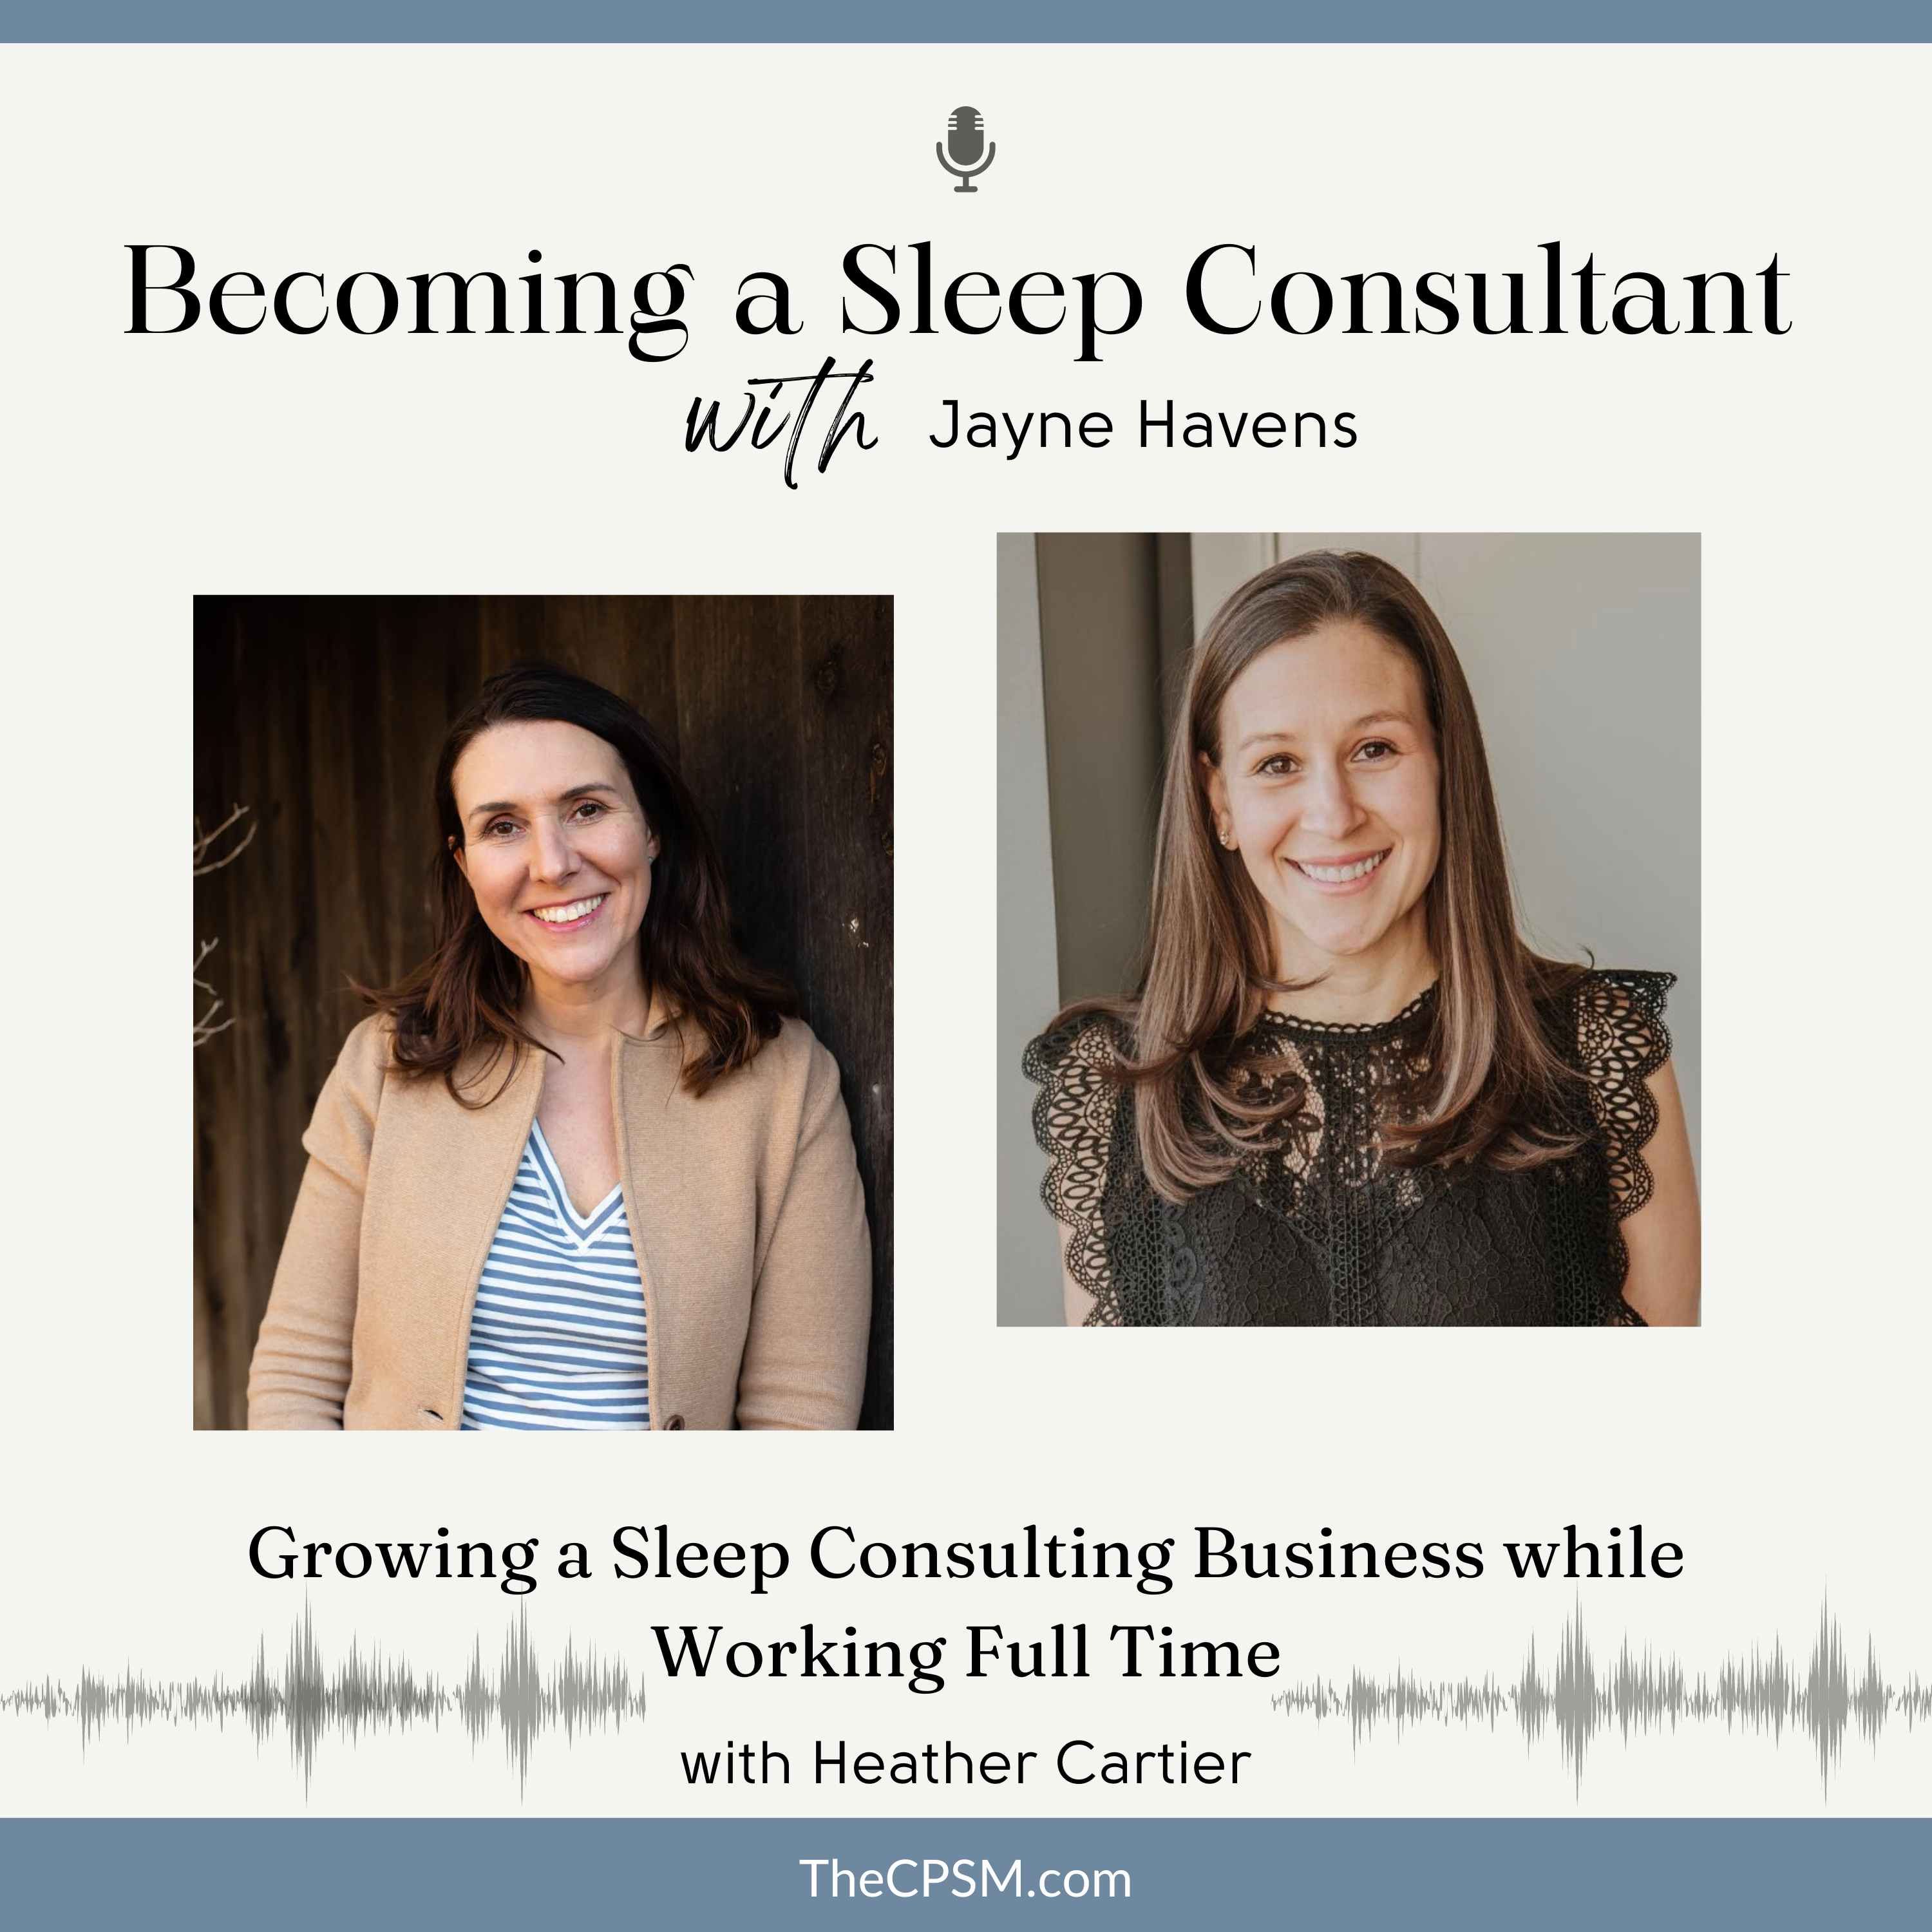 Growing a Sleep Consulting Business while Working Full Time with Heather Cartier